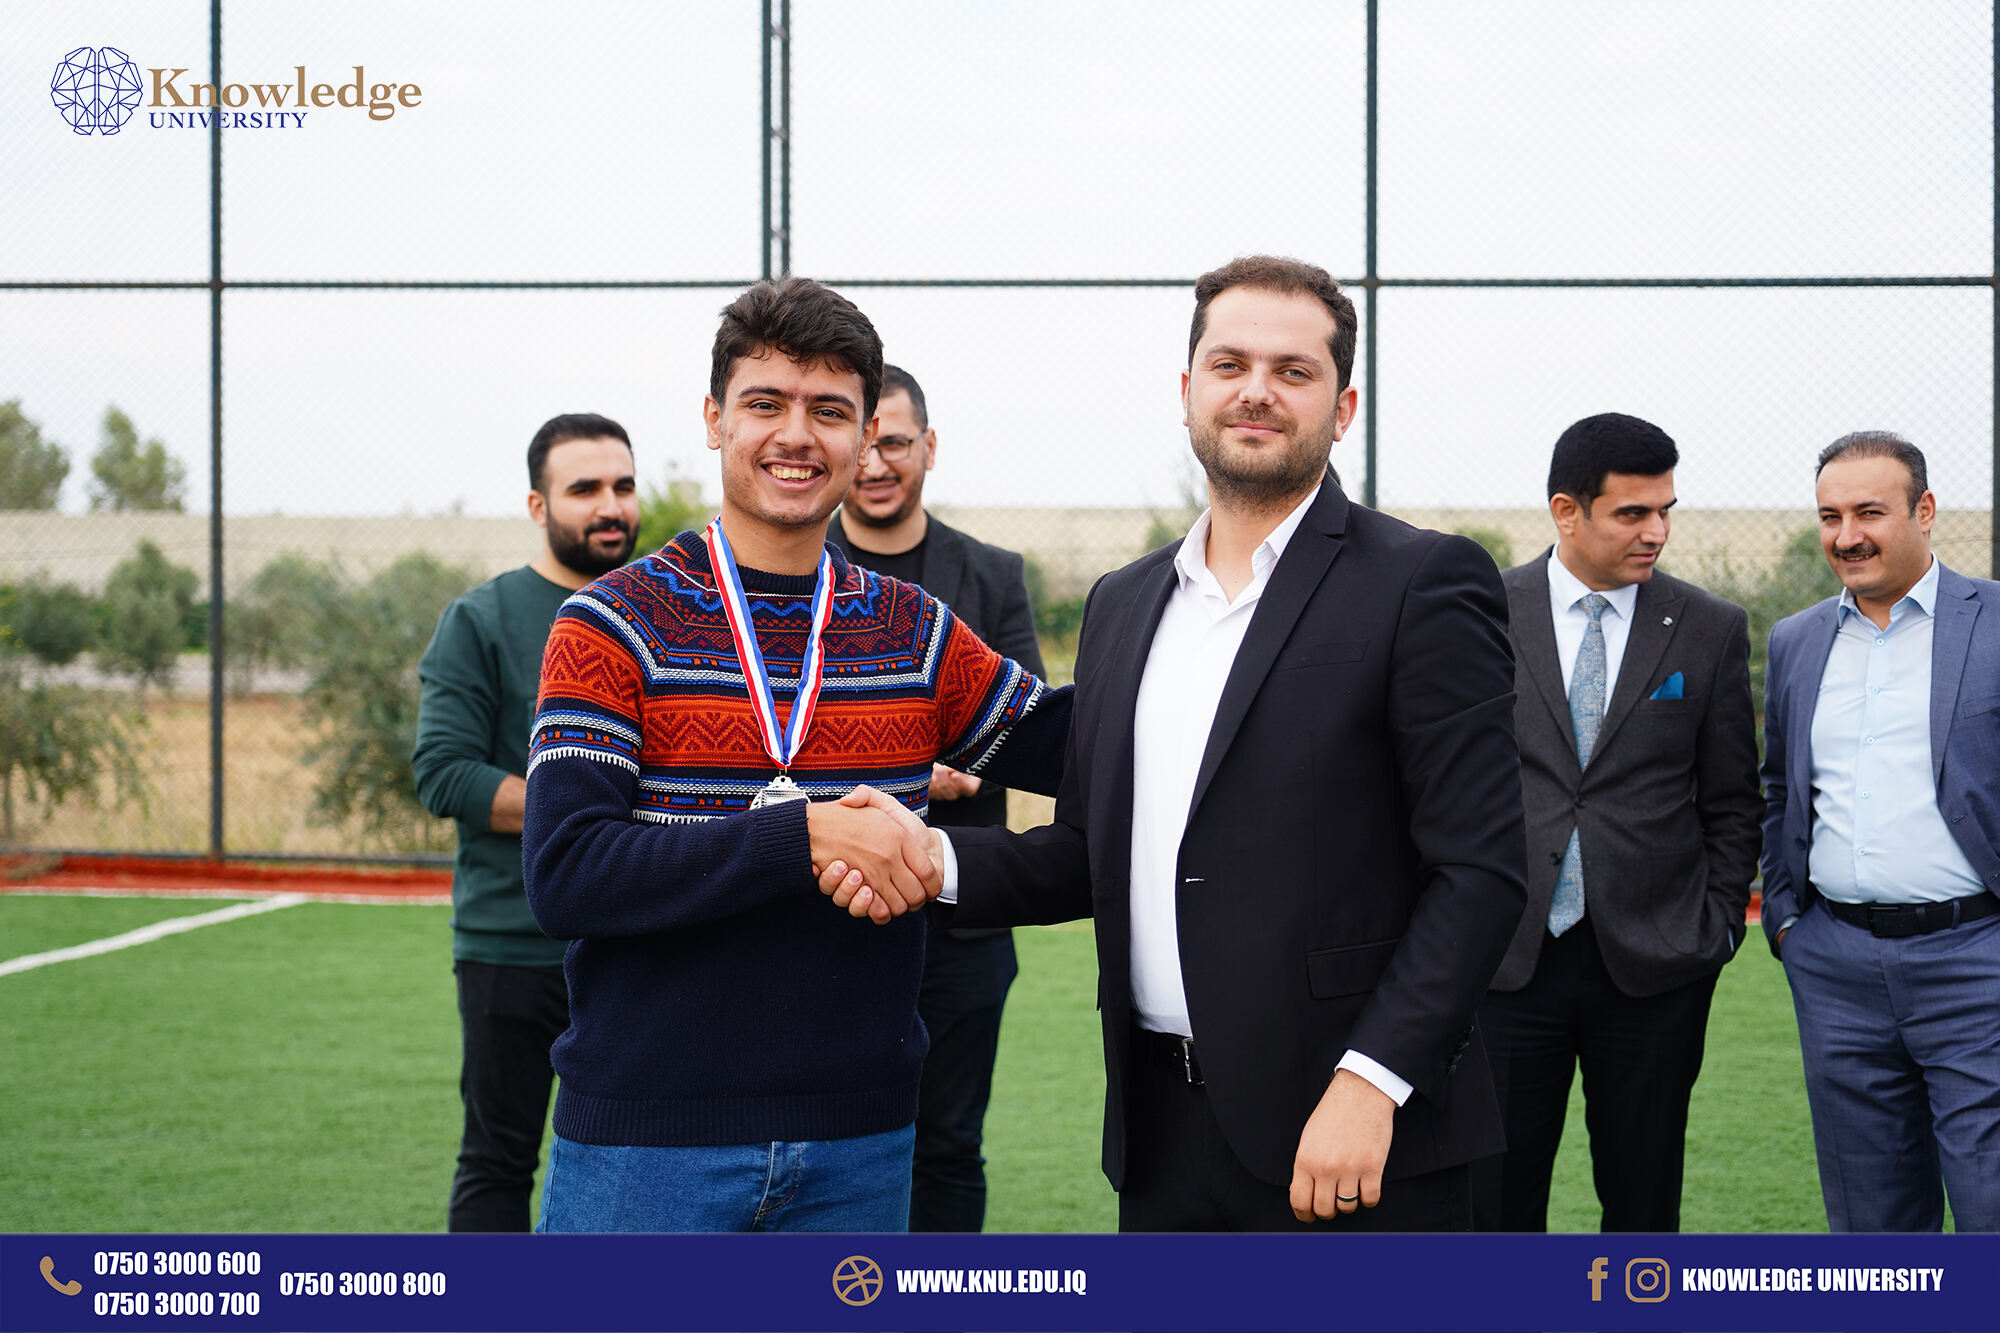 Third Stages Seize Victory in College of Pharmacy Football Tournament >